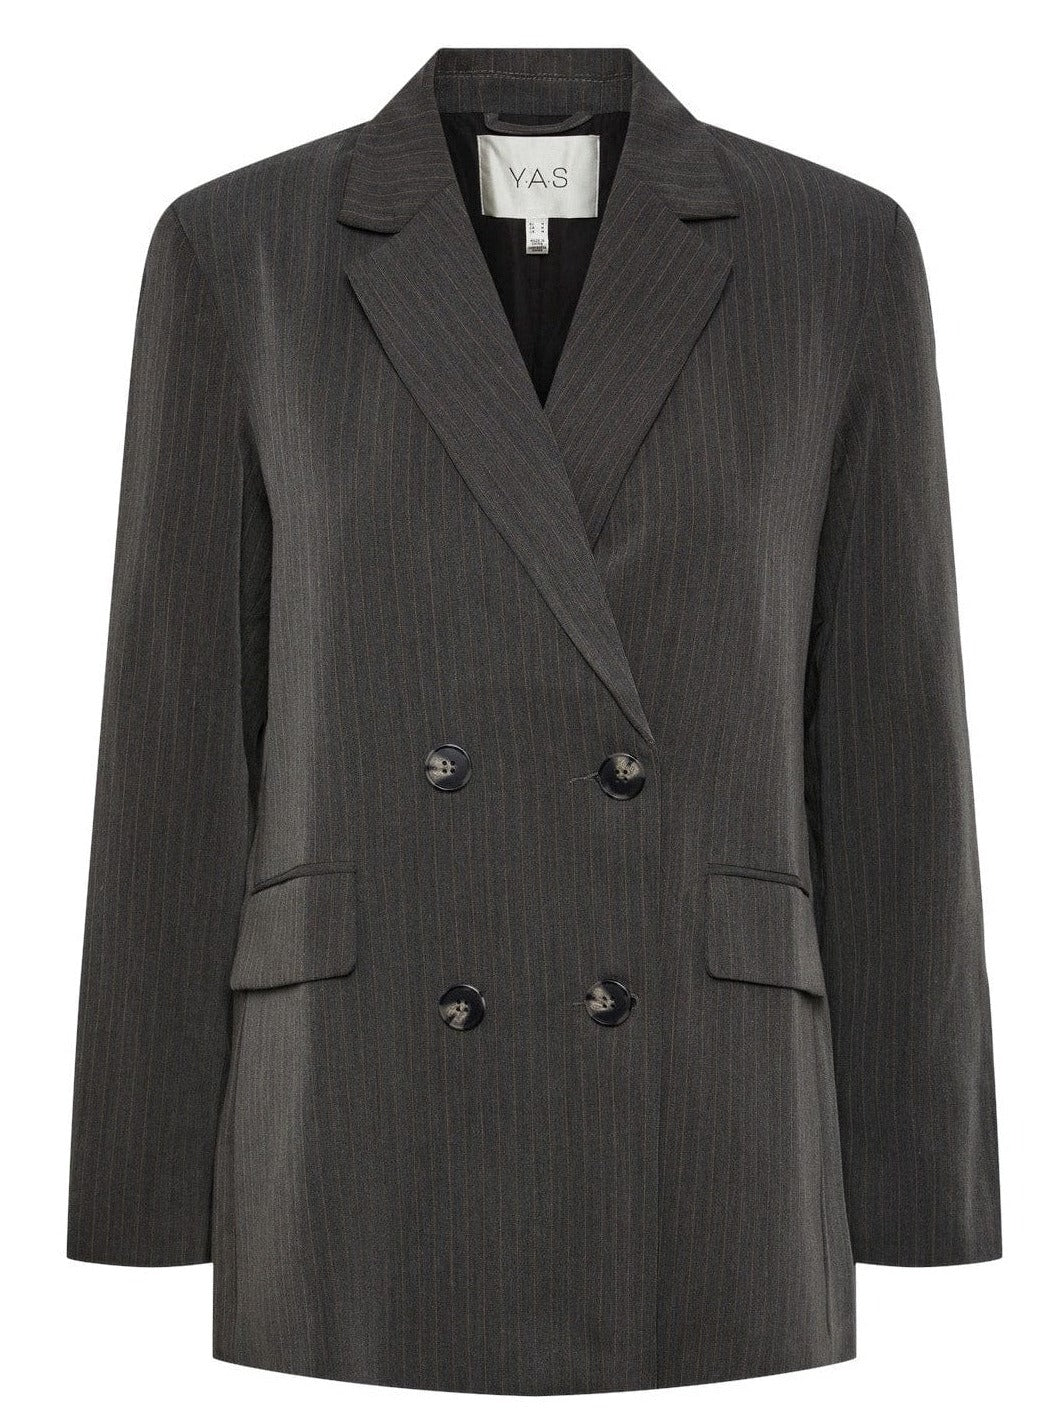 YAS - Pinly Blazer - Forest Gray